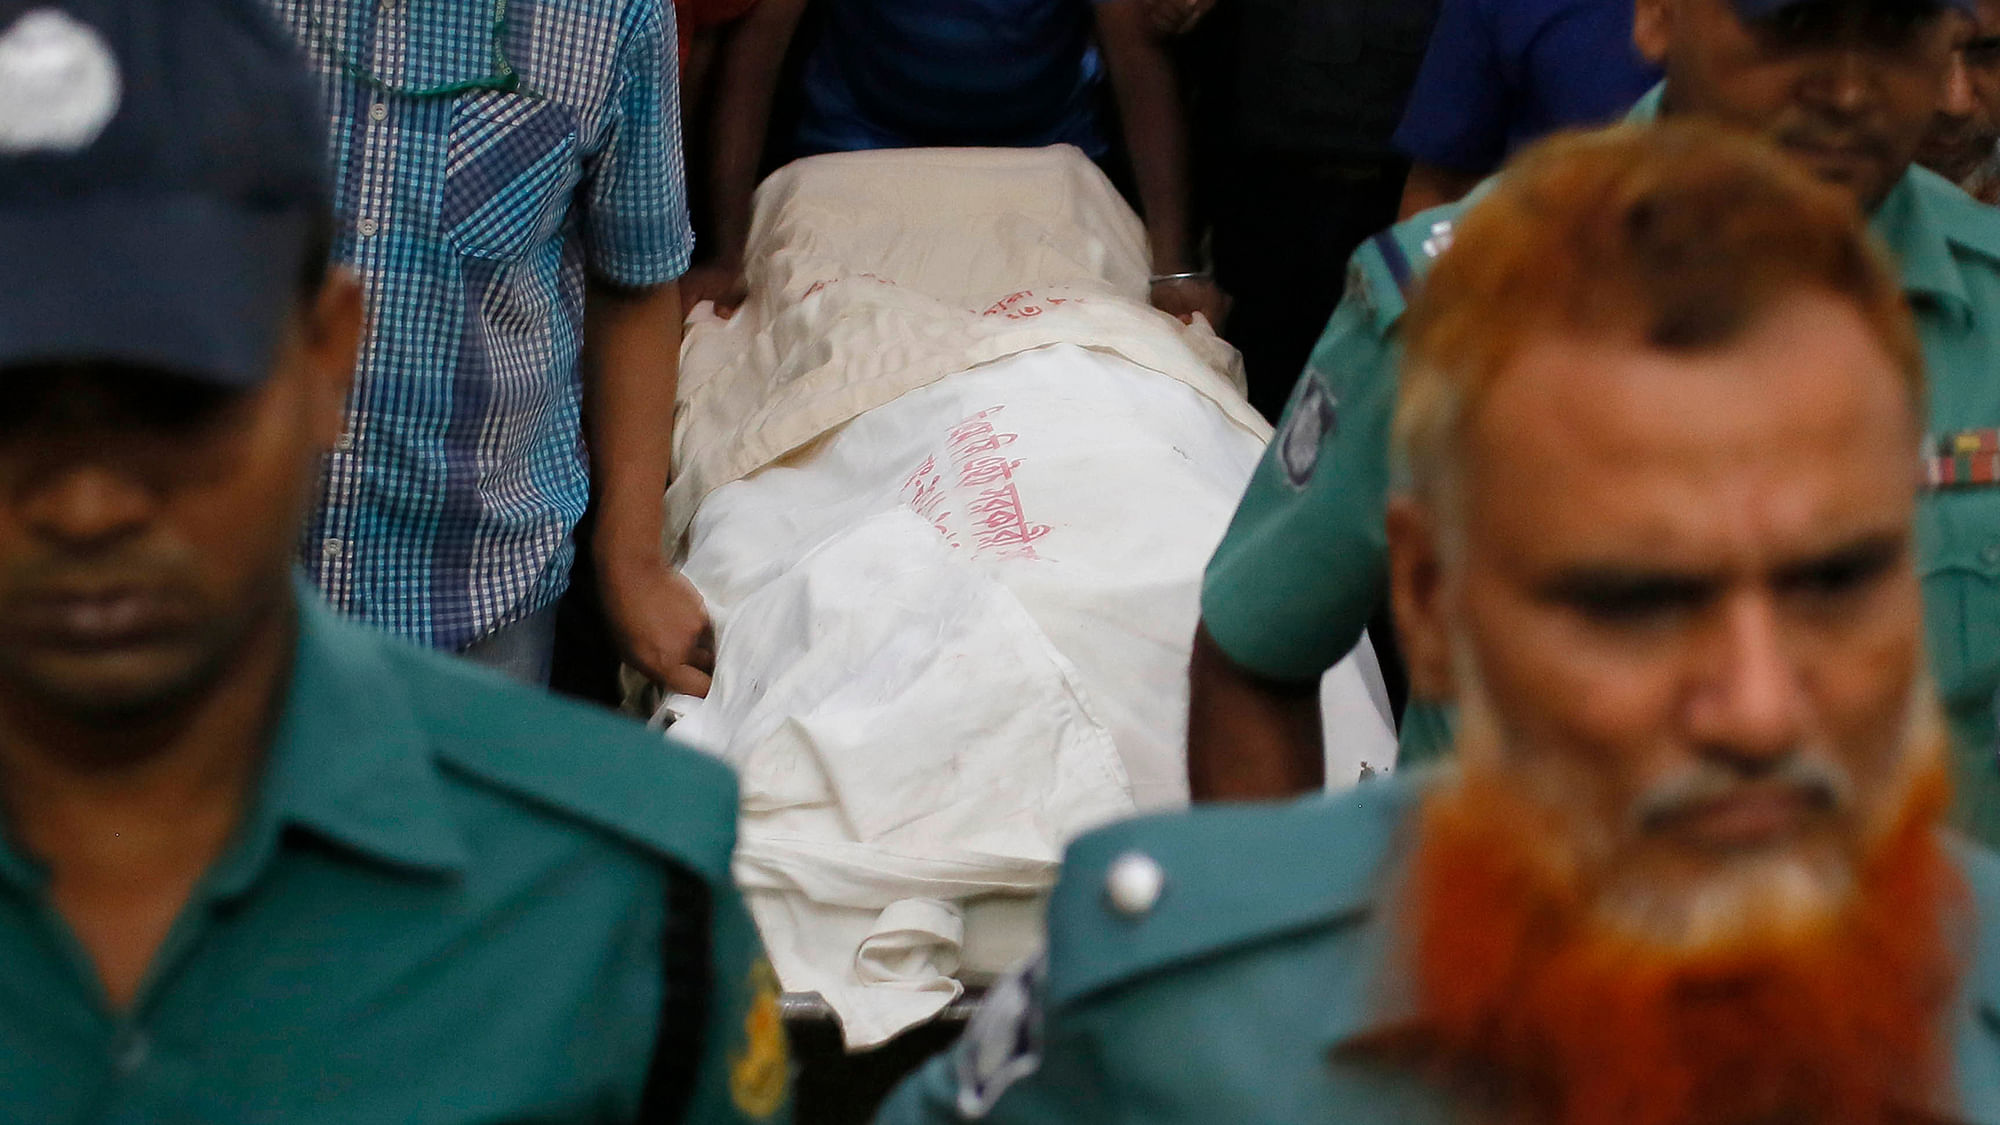 The body of Faisal Arefin Deepan is carried on a stretcher at Dhaka Medical College Hospital. (Photo: AP)